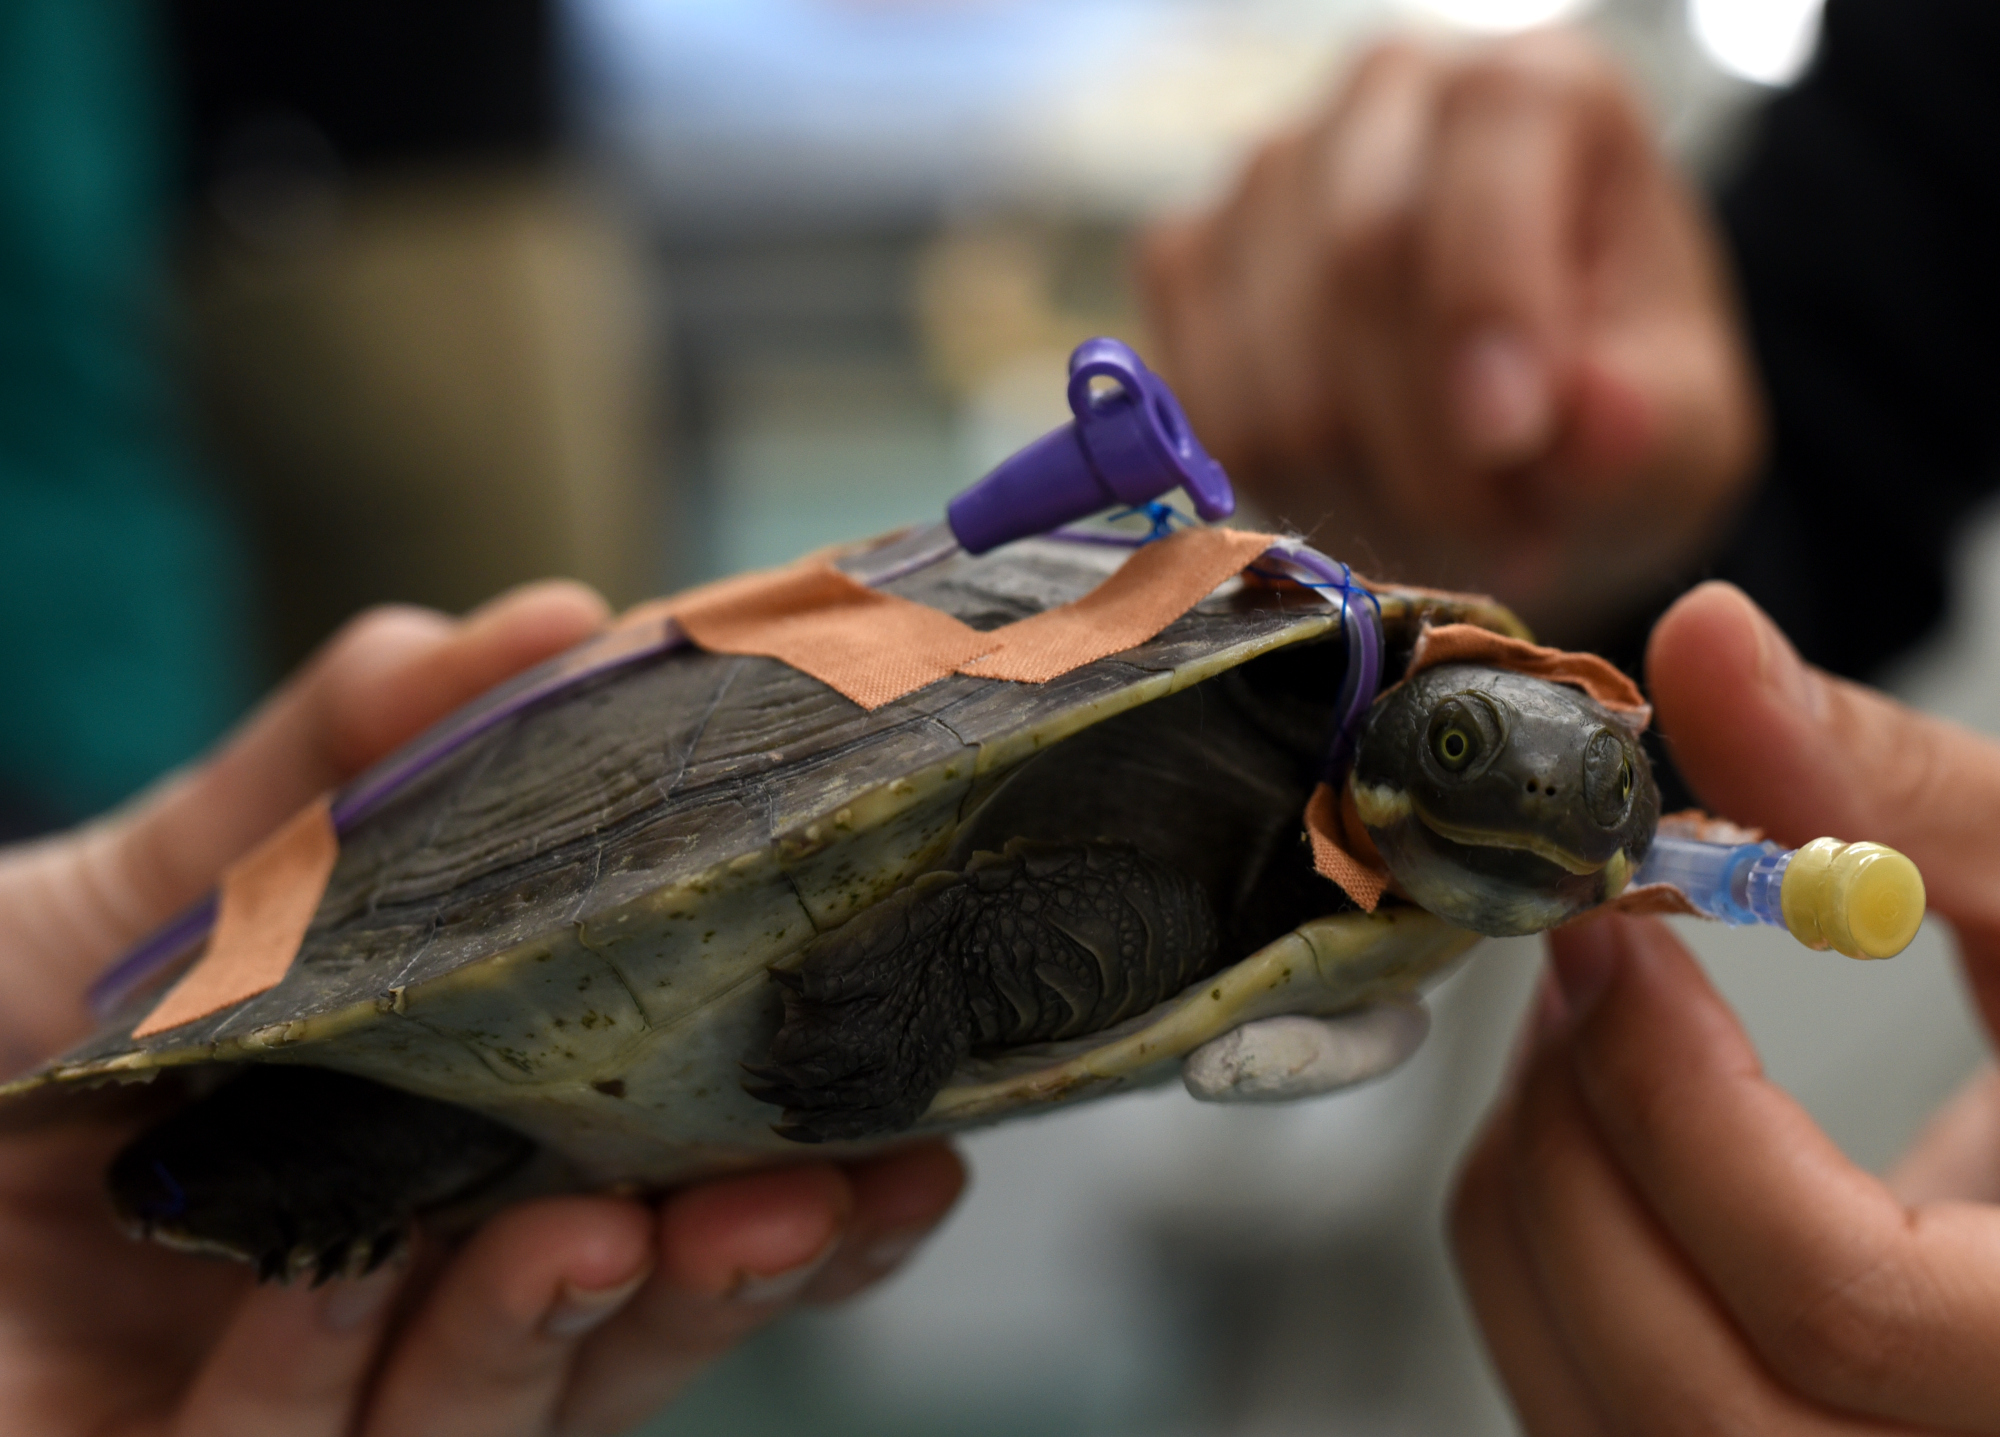 Turtle recovering after fishing gear injury Photo by Currumbin Wildlife Hospital